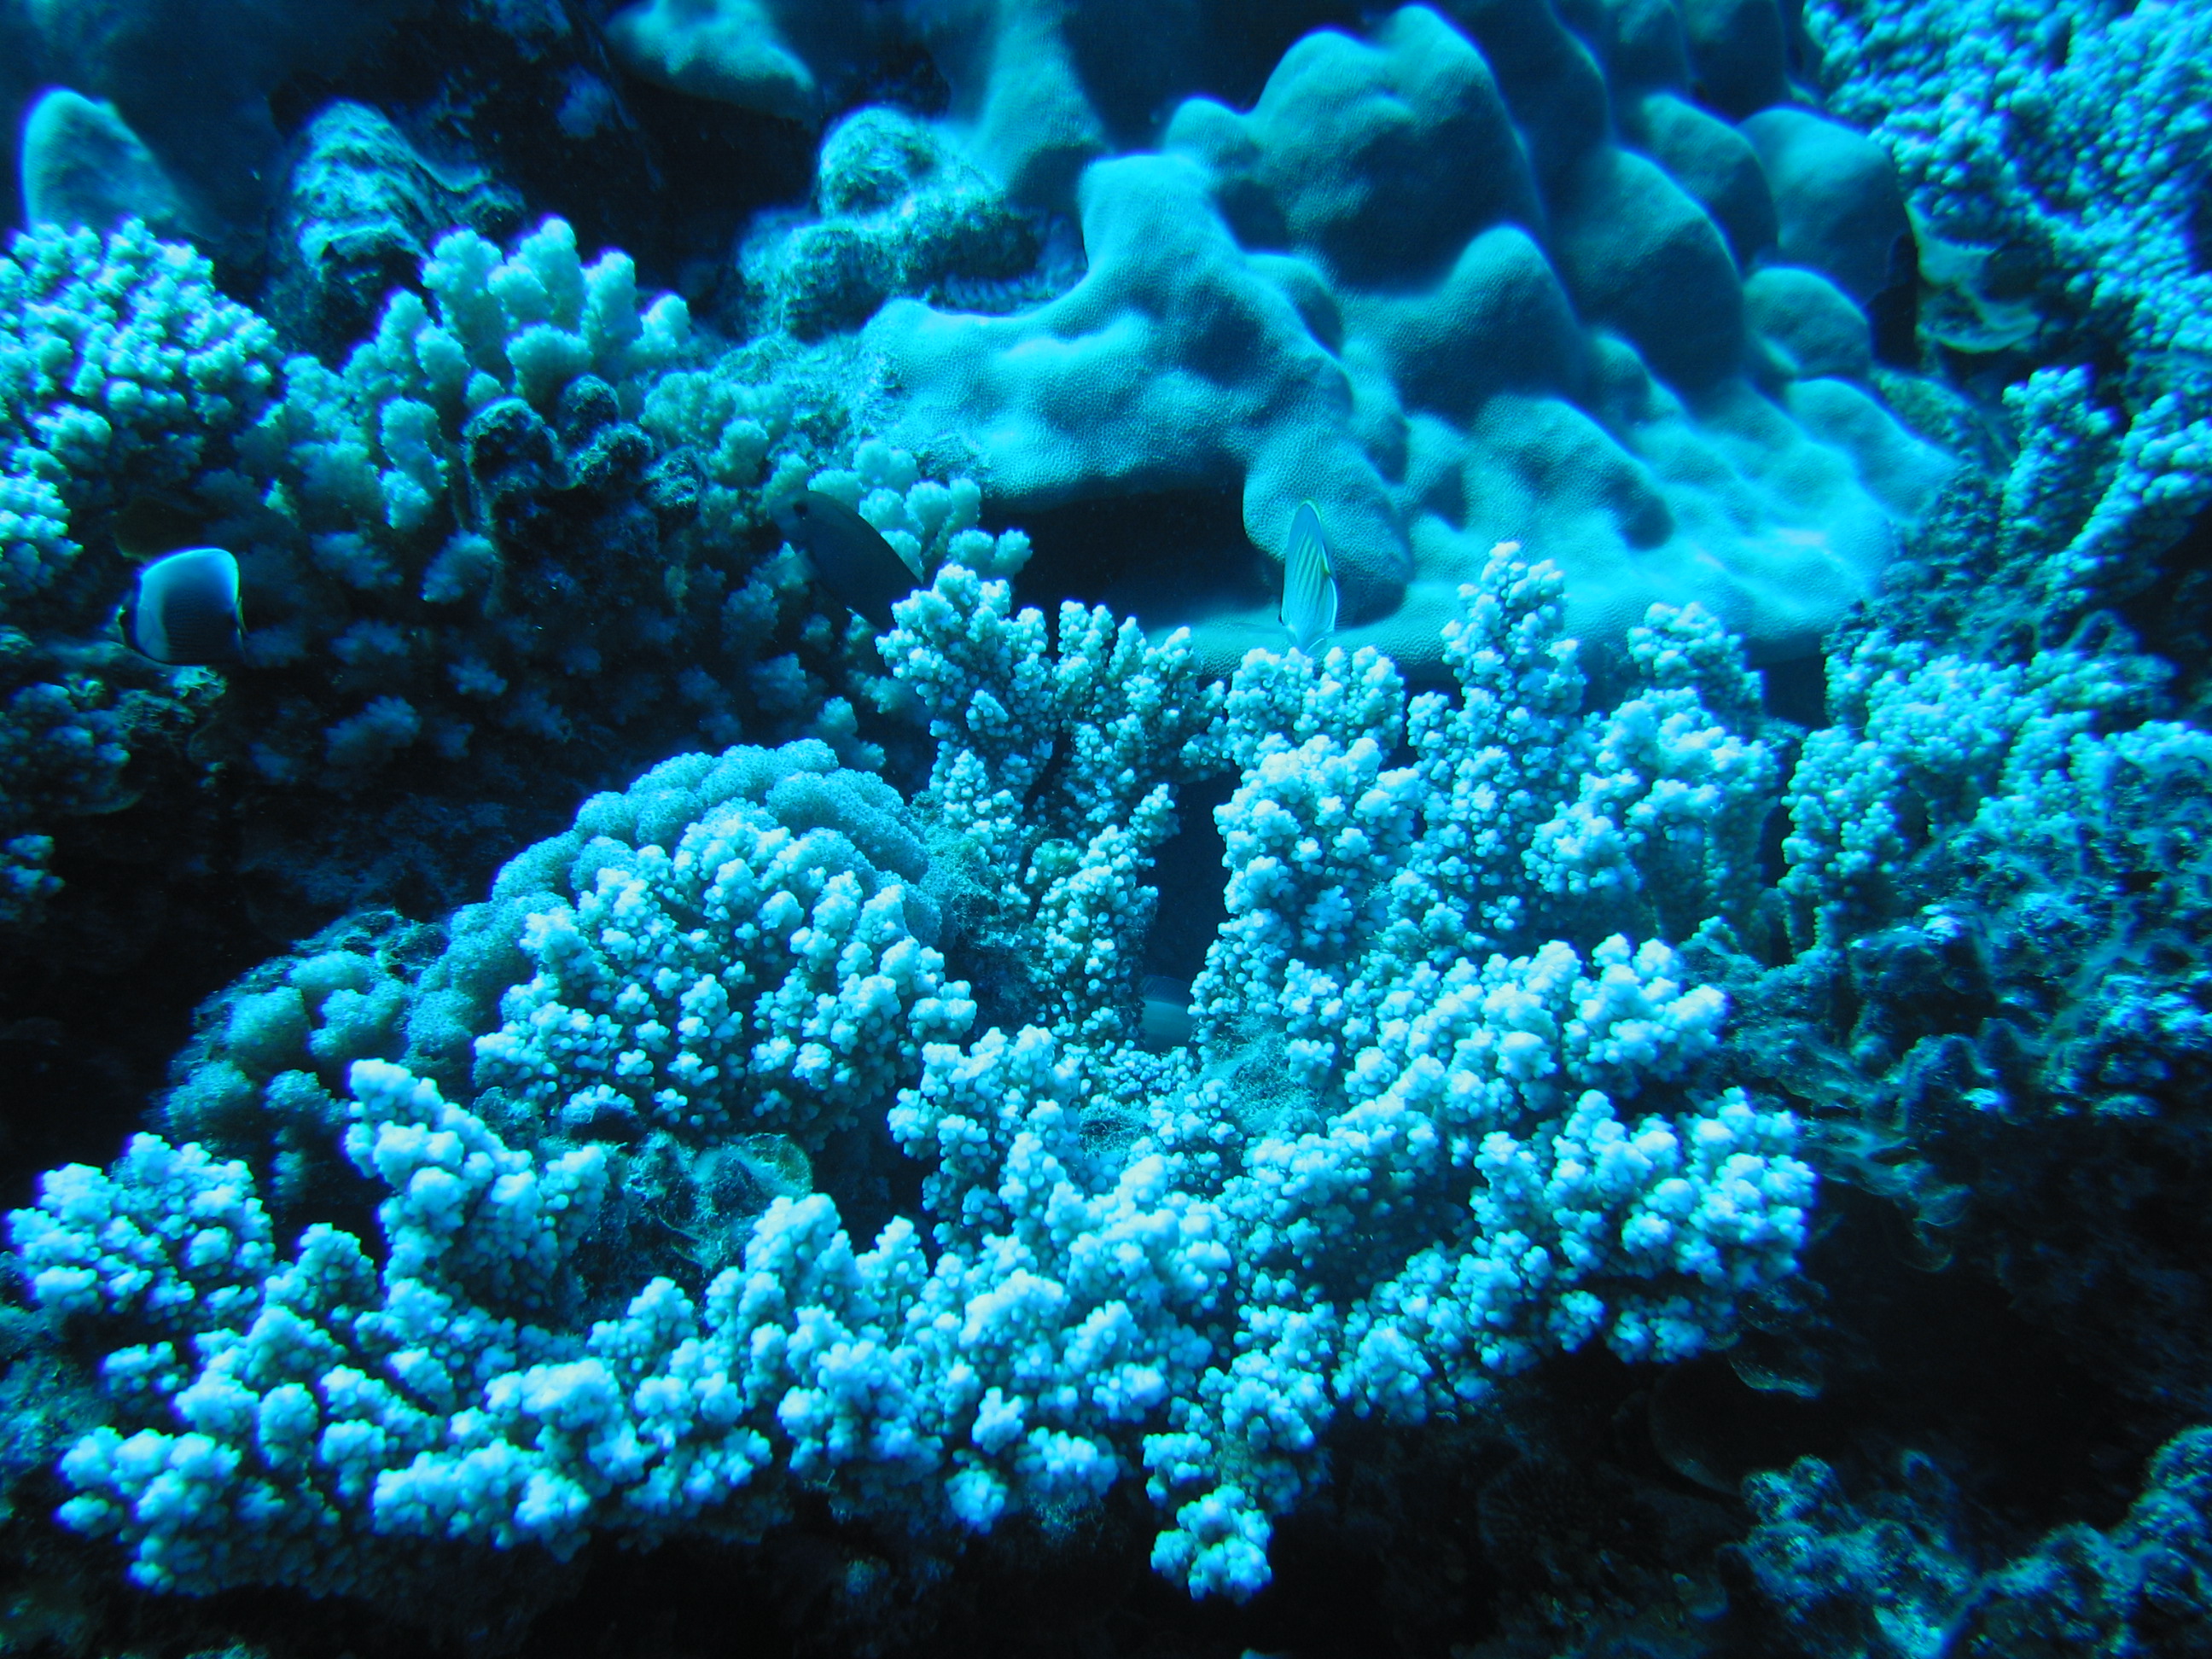 A blue coral reef